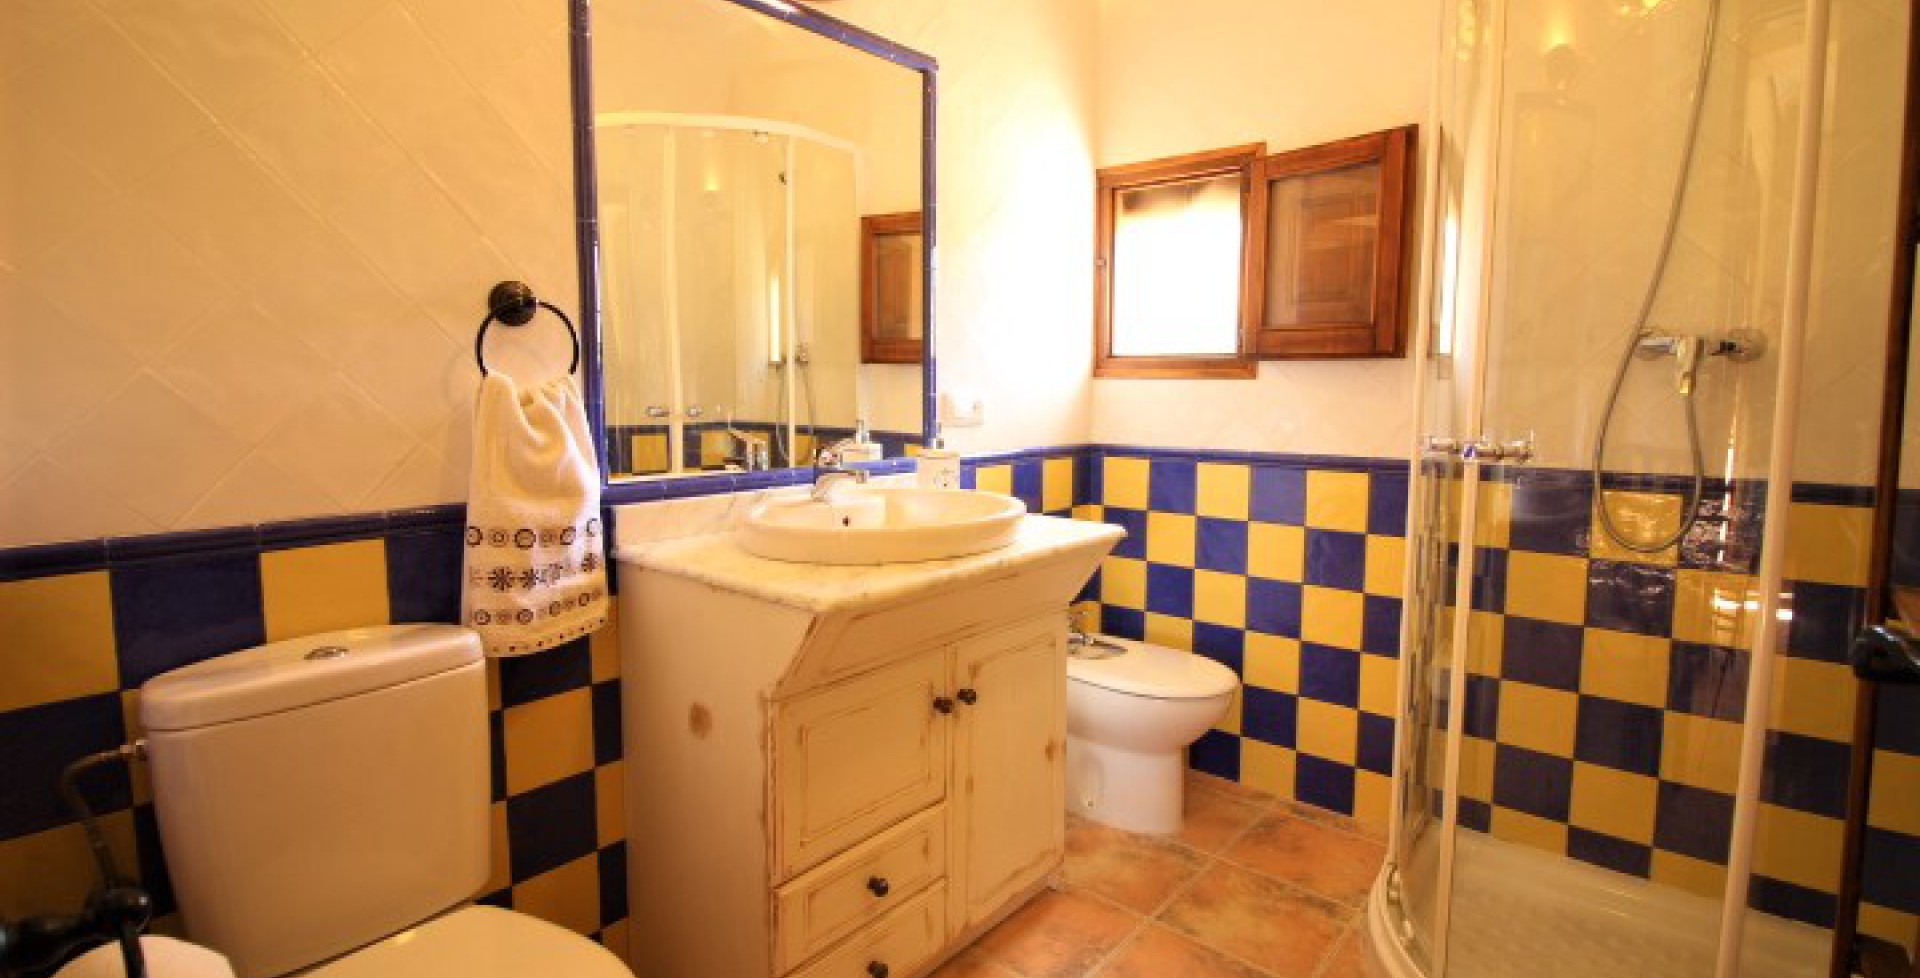 spectacular detached country house with nice bathroom